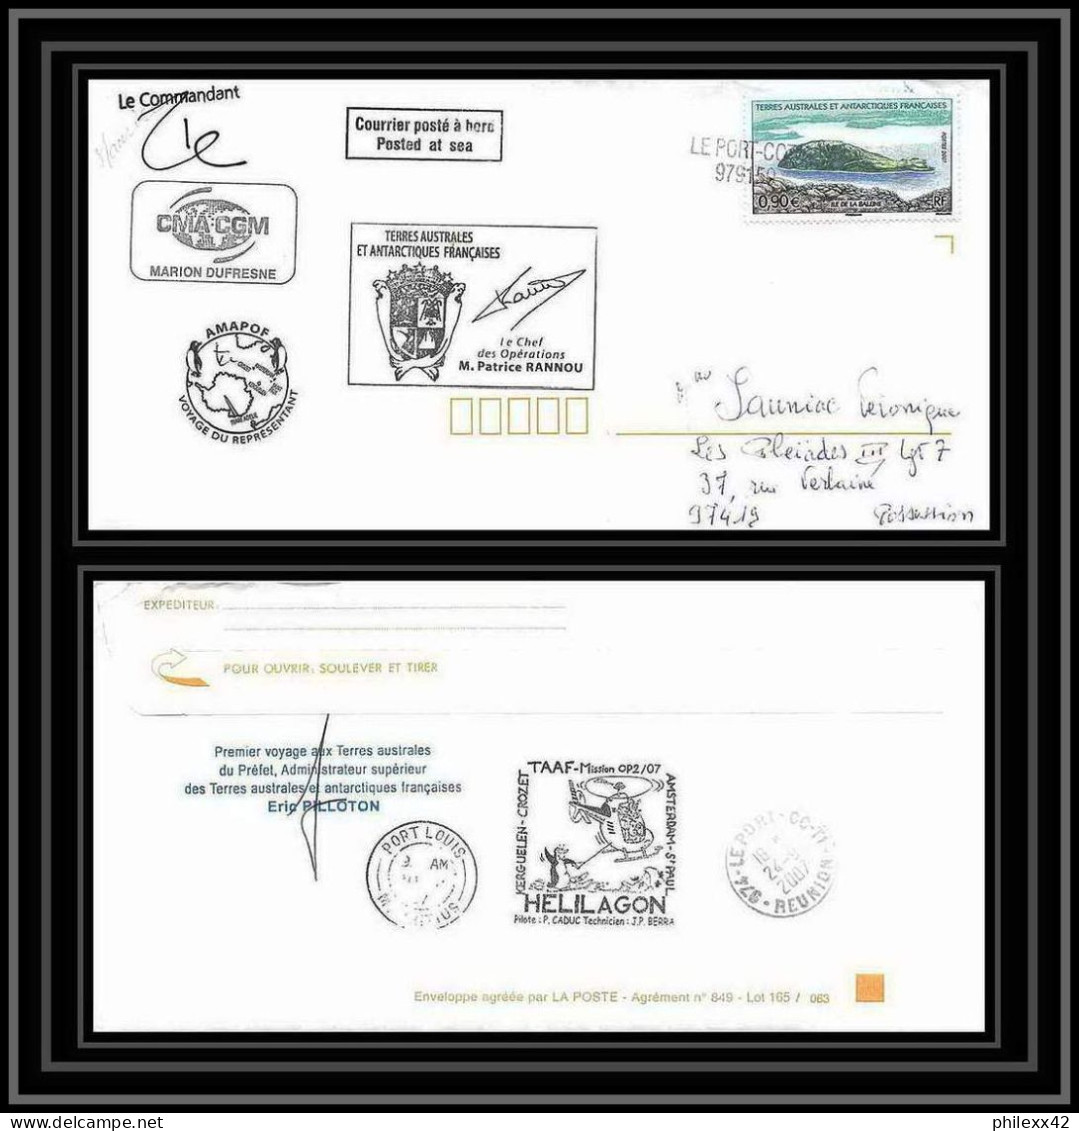 2716 ANTARCTIC Terres Australes (taaf) Dufresne 2 Signé Signed Op 2007/2 Maurice (mauritus) Helilagon Voyage Pilloton - Expéditions Antarctiques